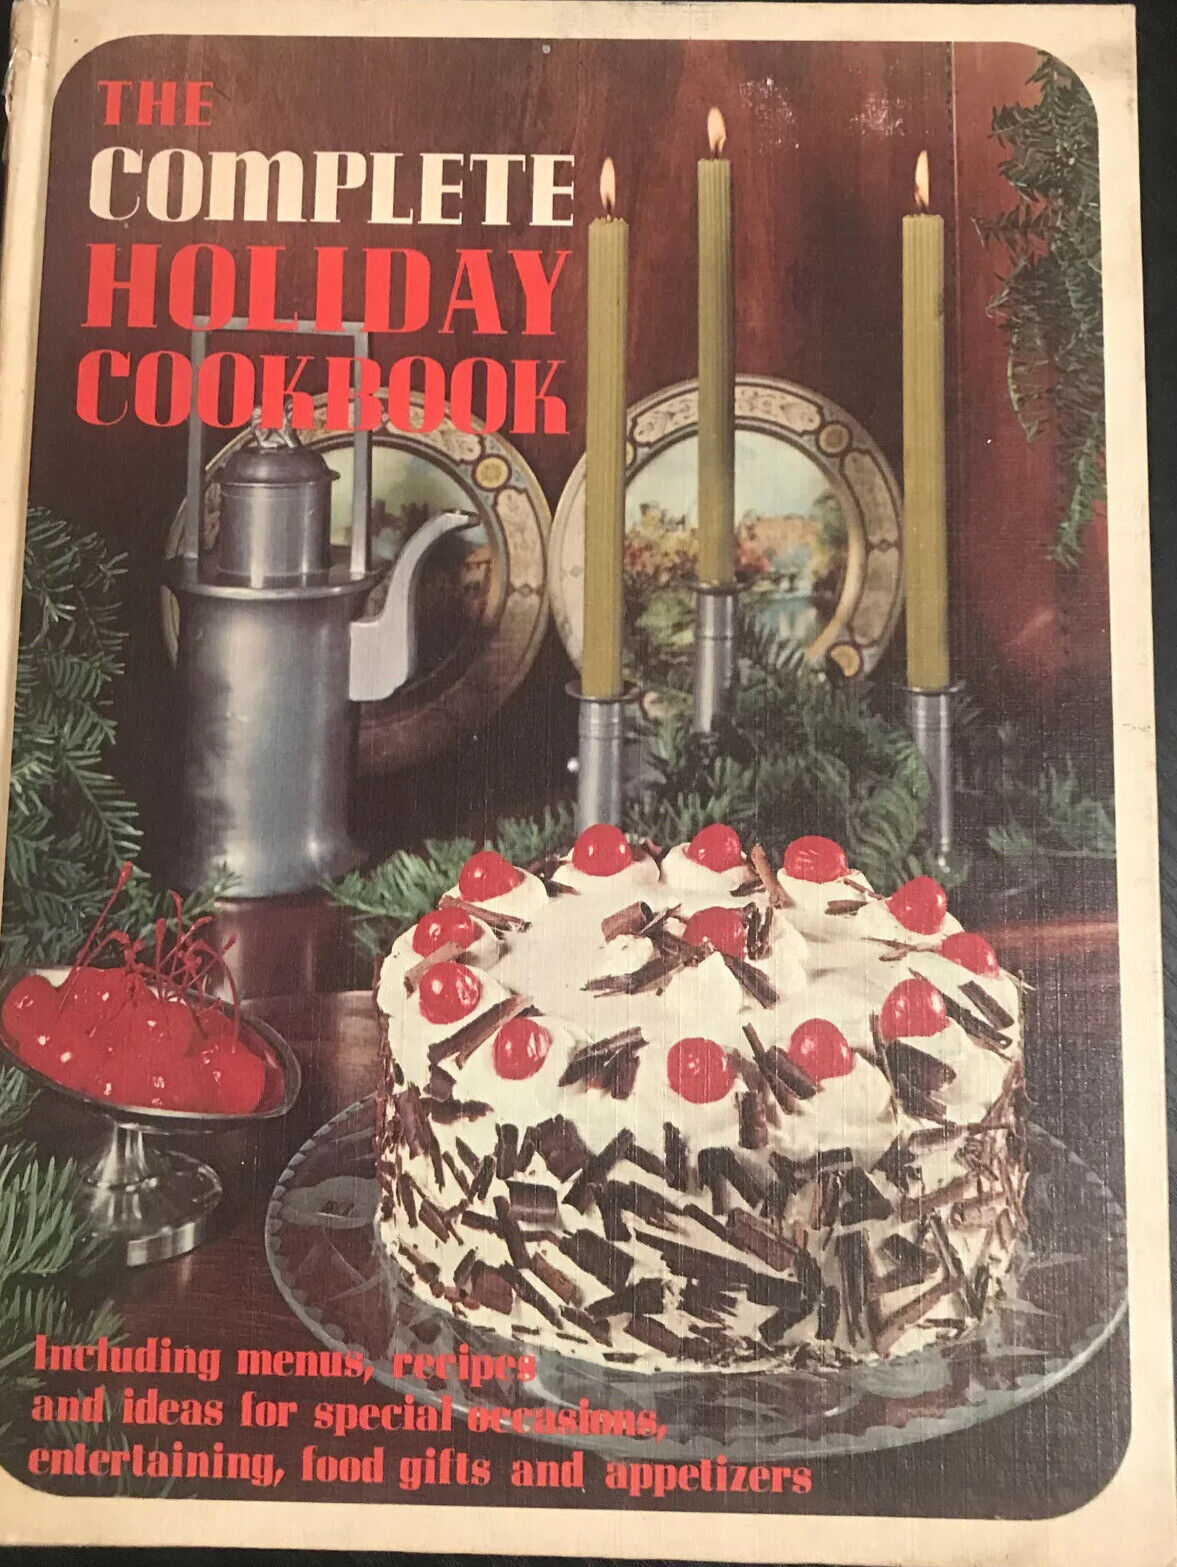 1969 The Complete Holiday Cookbook by Favorite Recipe Press Hardcover